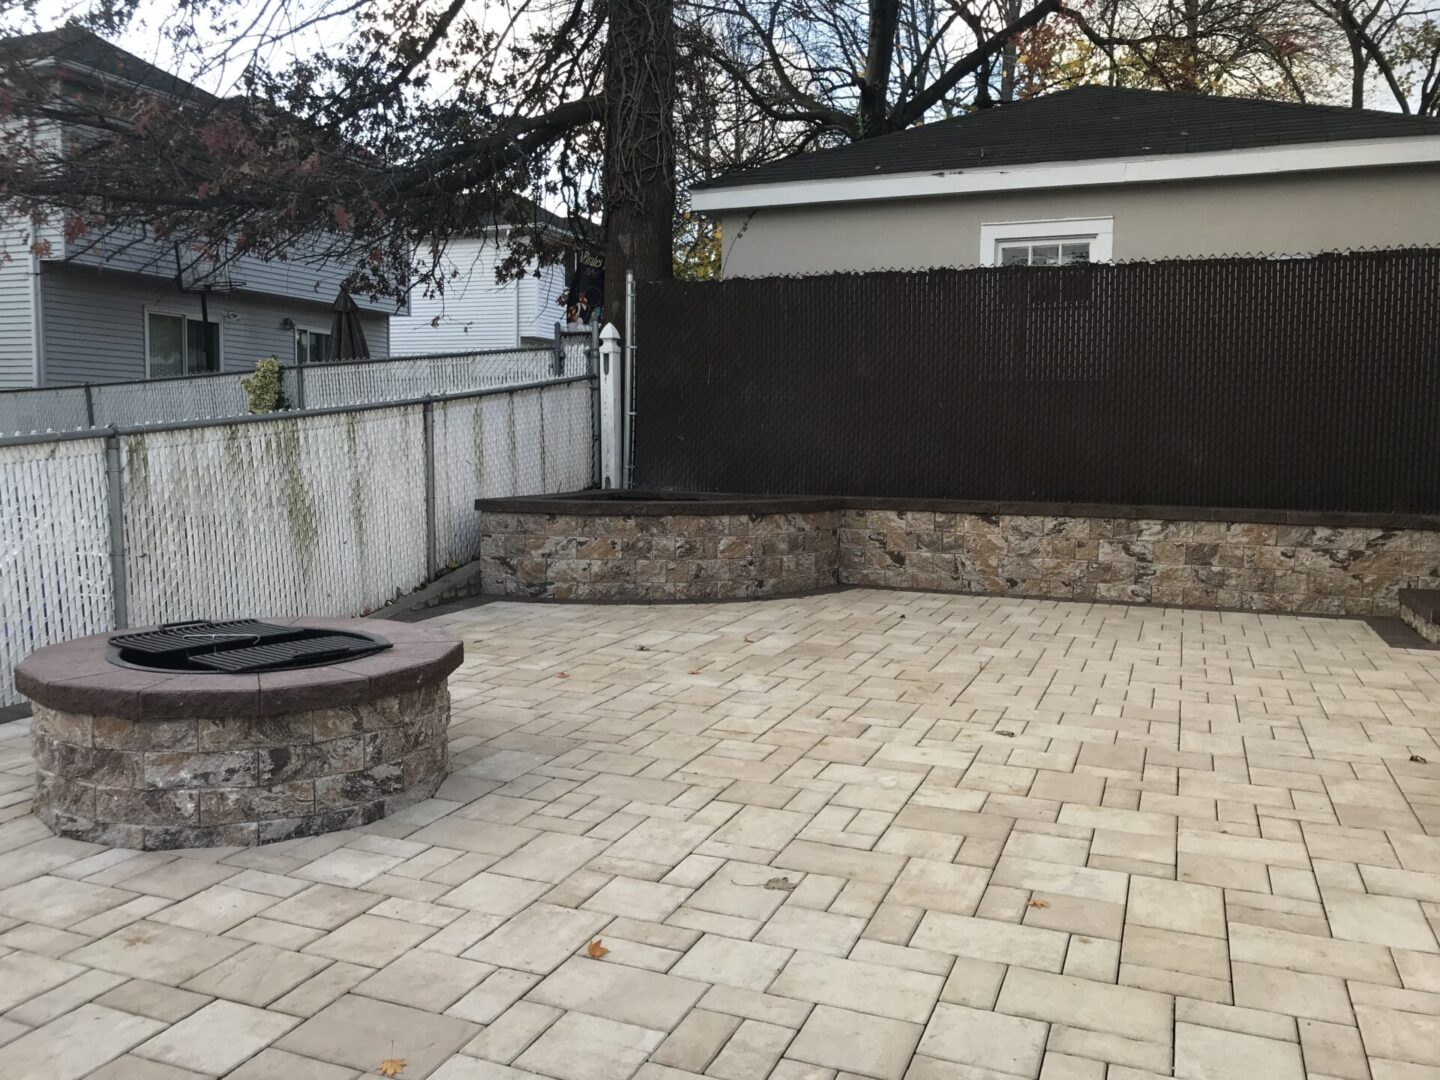 Landscape project of a house with fire grill